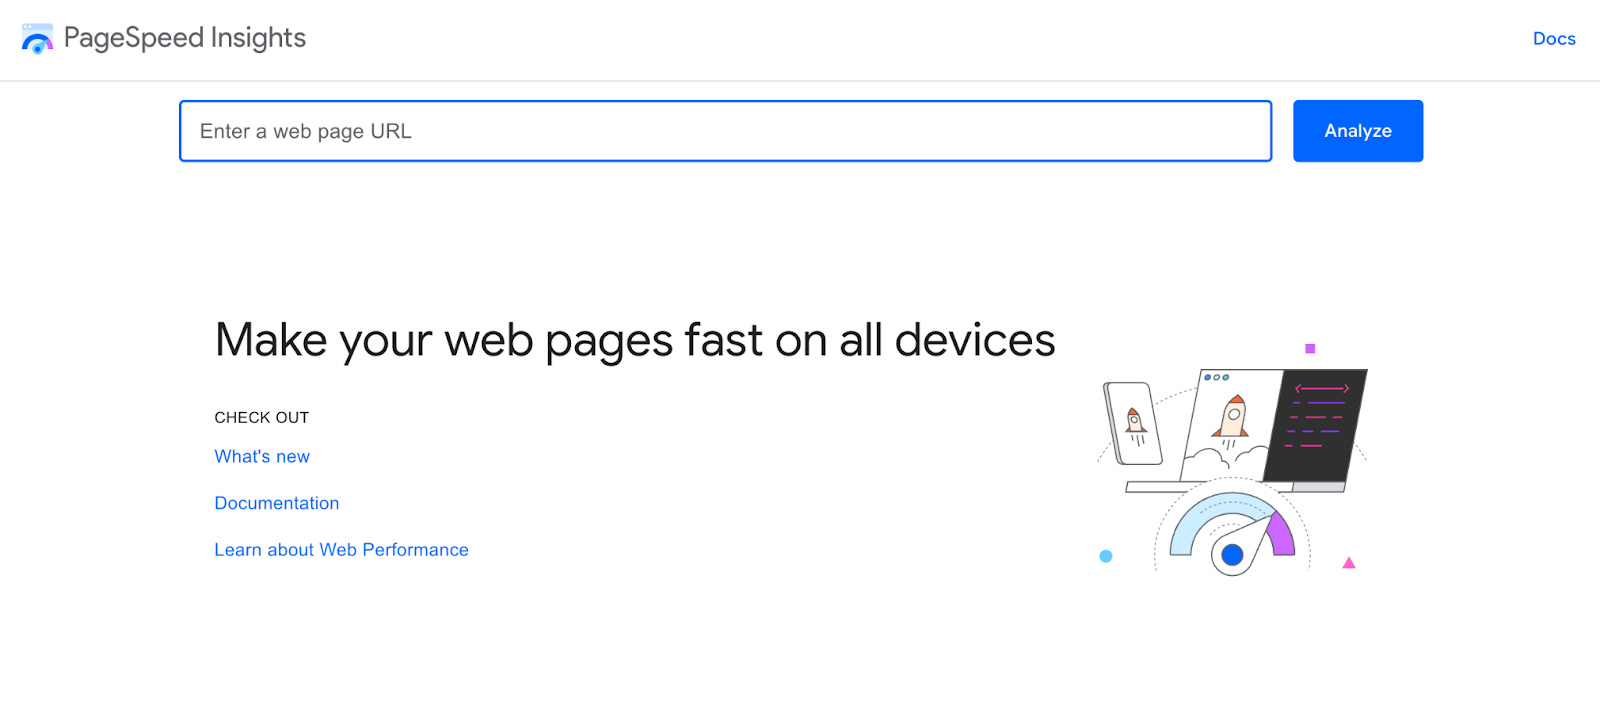 Google PageSpeed Insights homepage